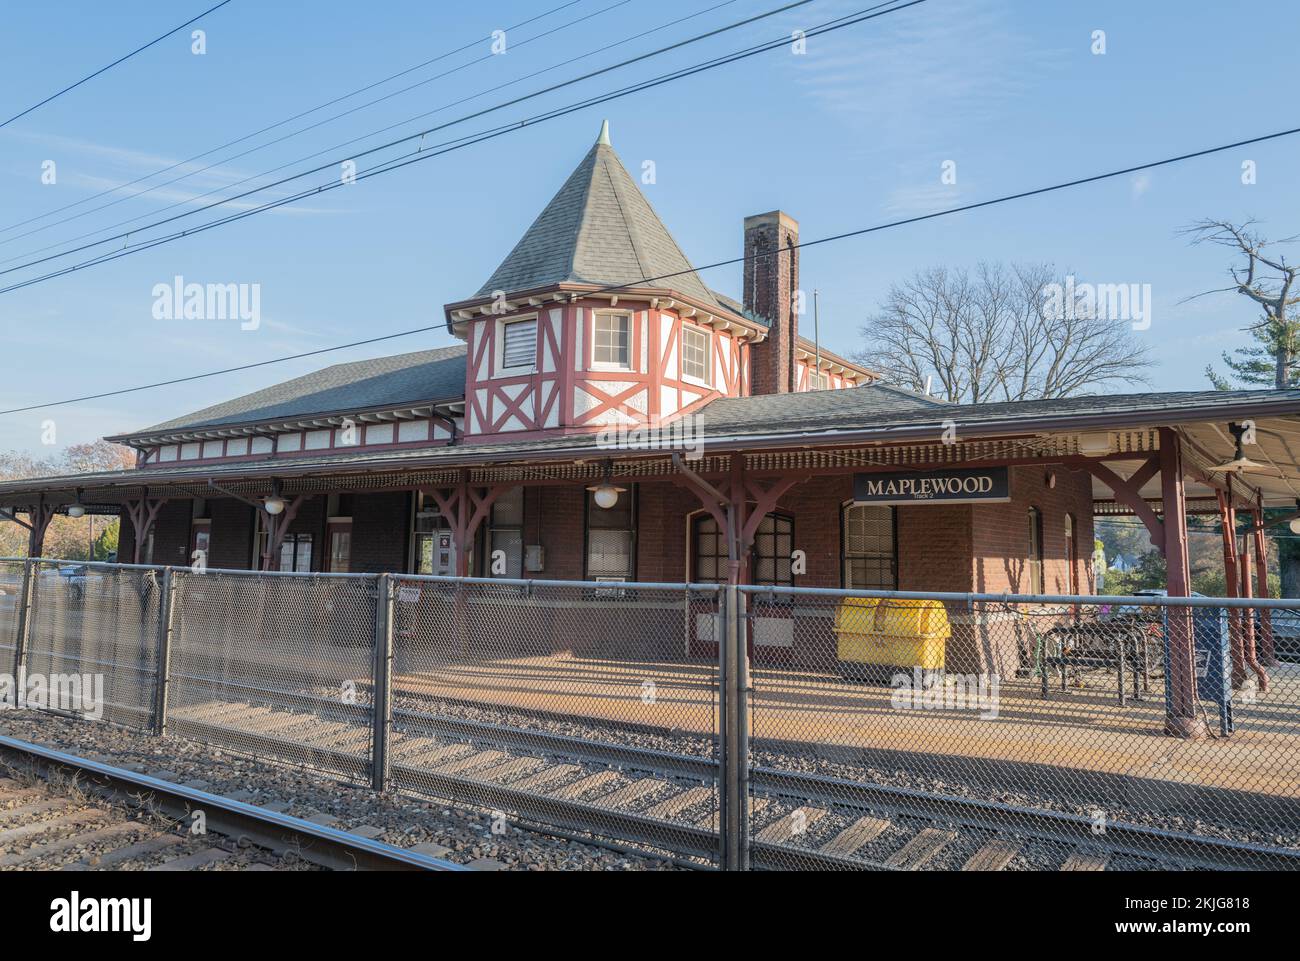 MAPLEWOOD, N.J. – November 24, 2022: The station house is seen at NJ Transit’s Maplewood Station. Stock Photo